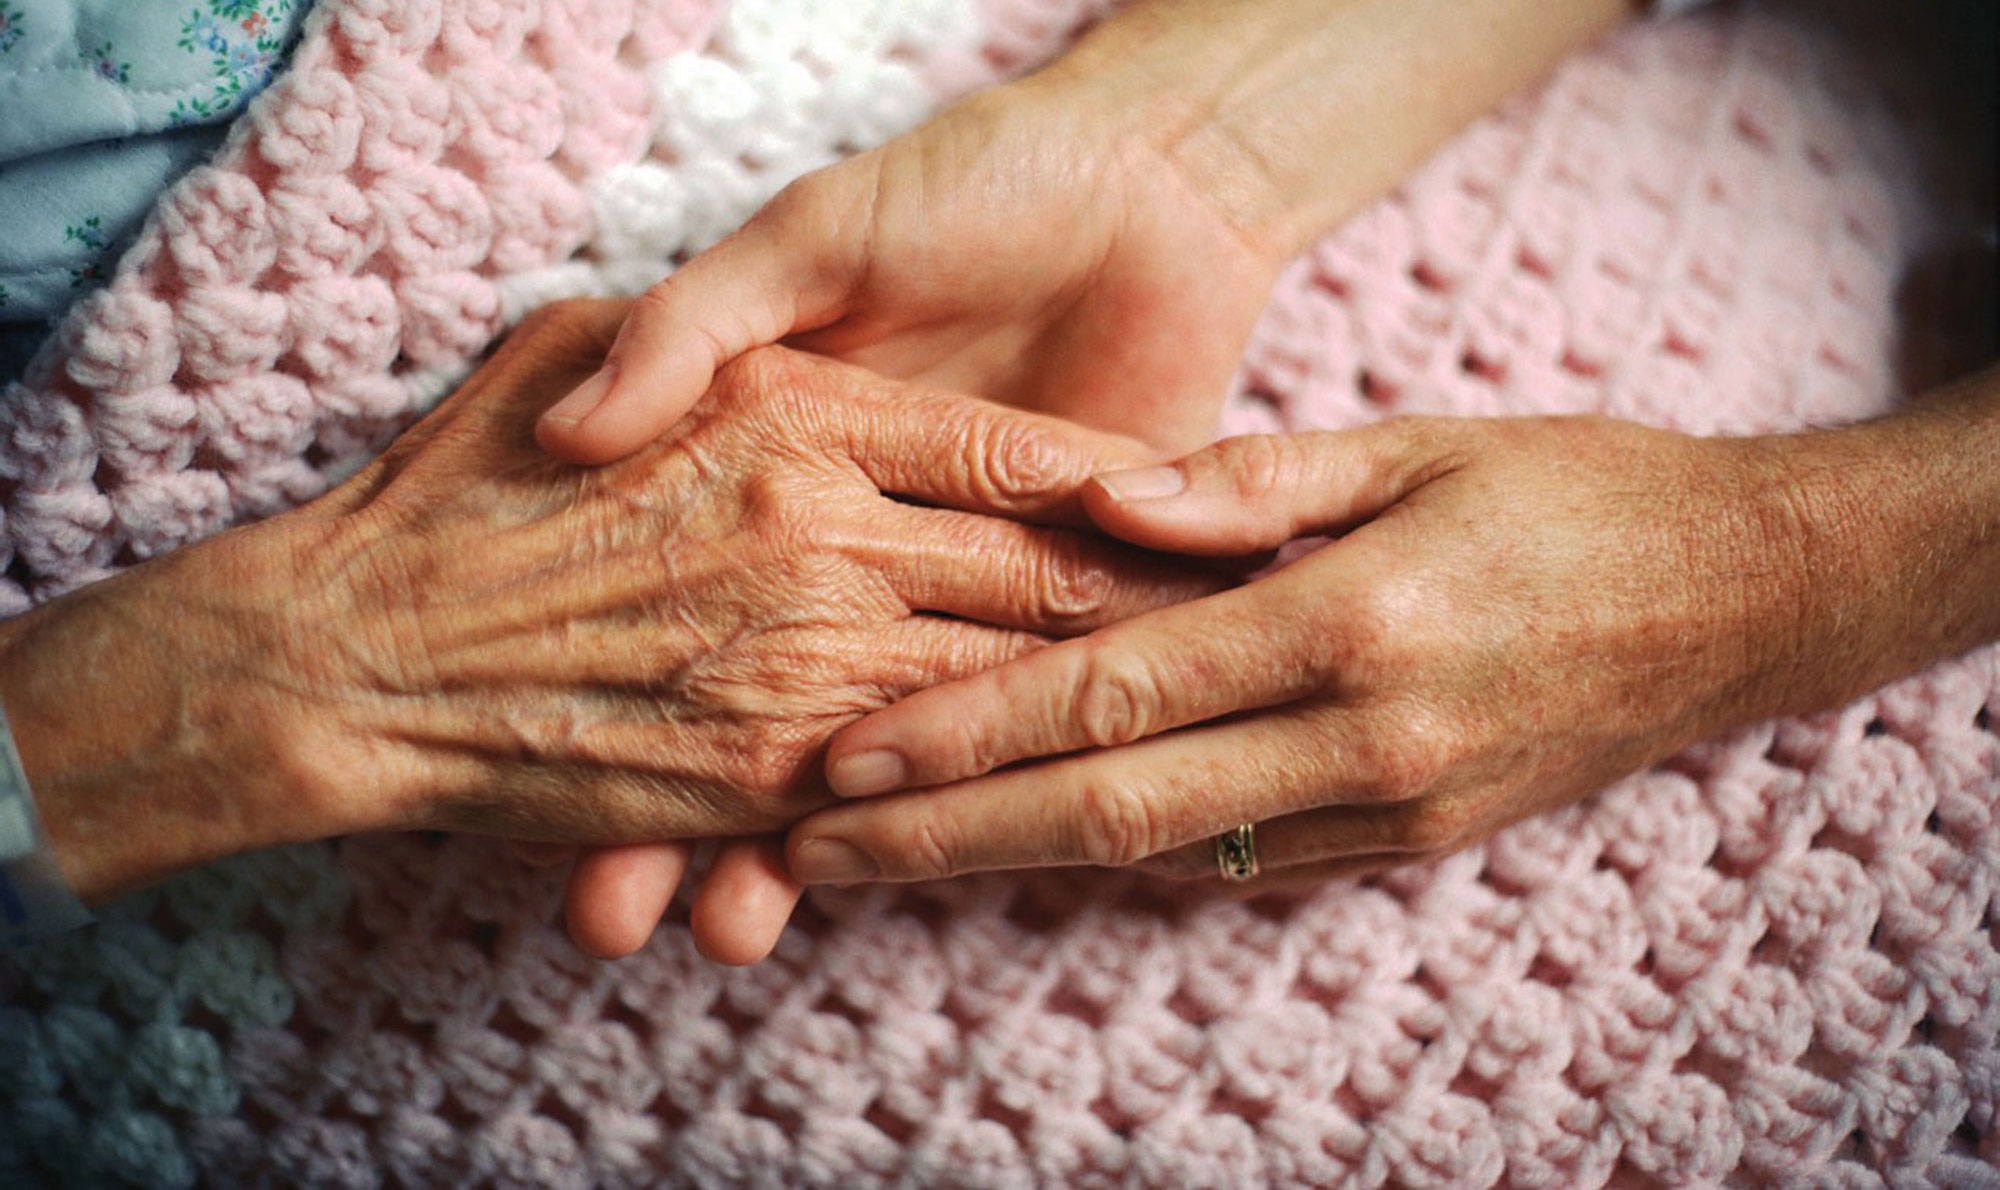 Holding Hands (Hospice Care)